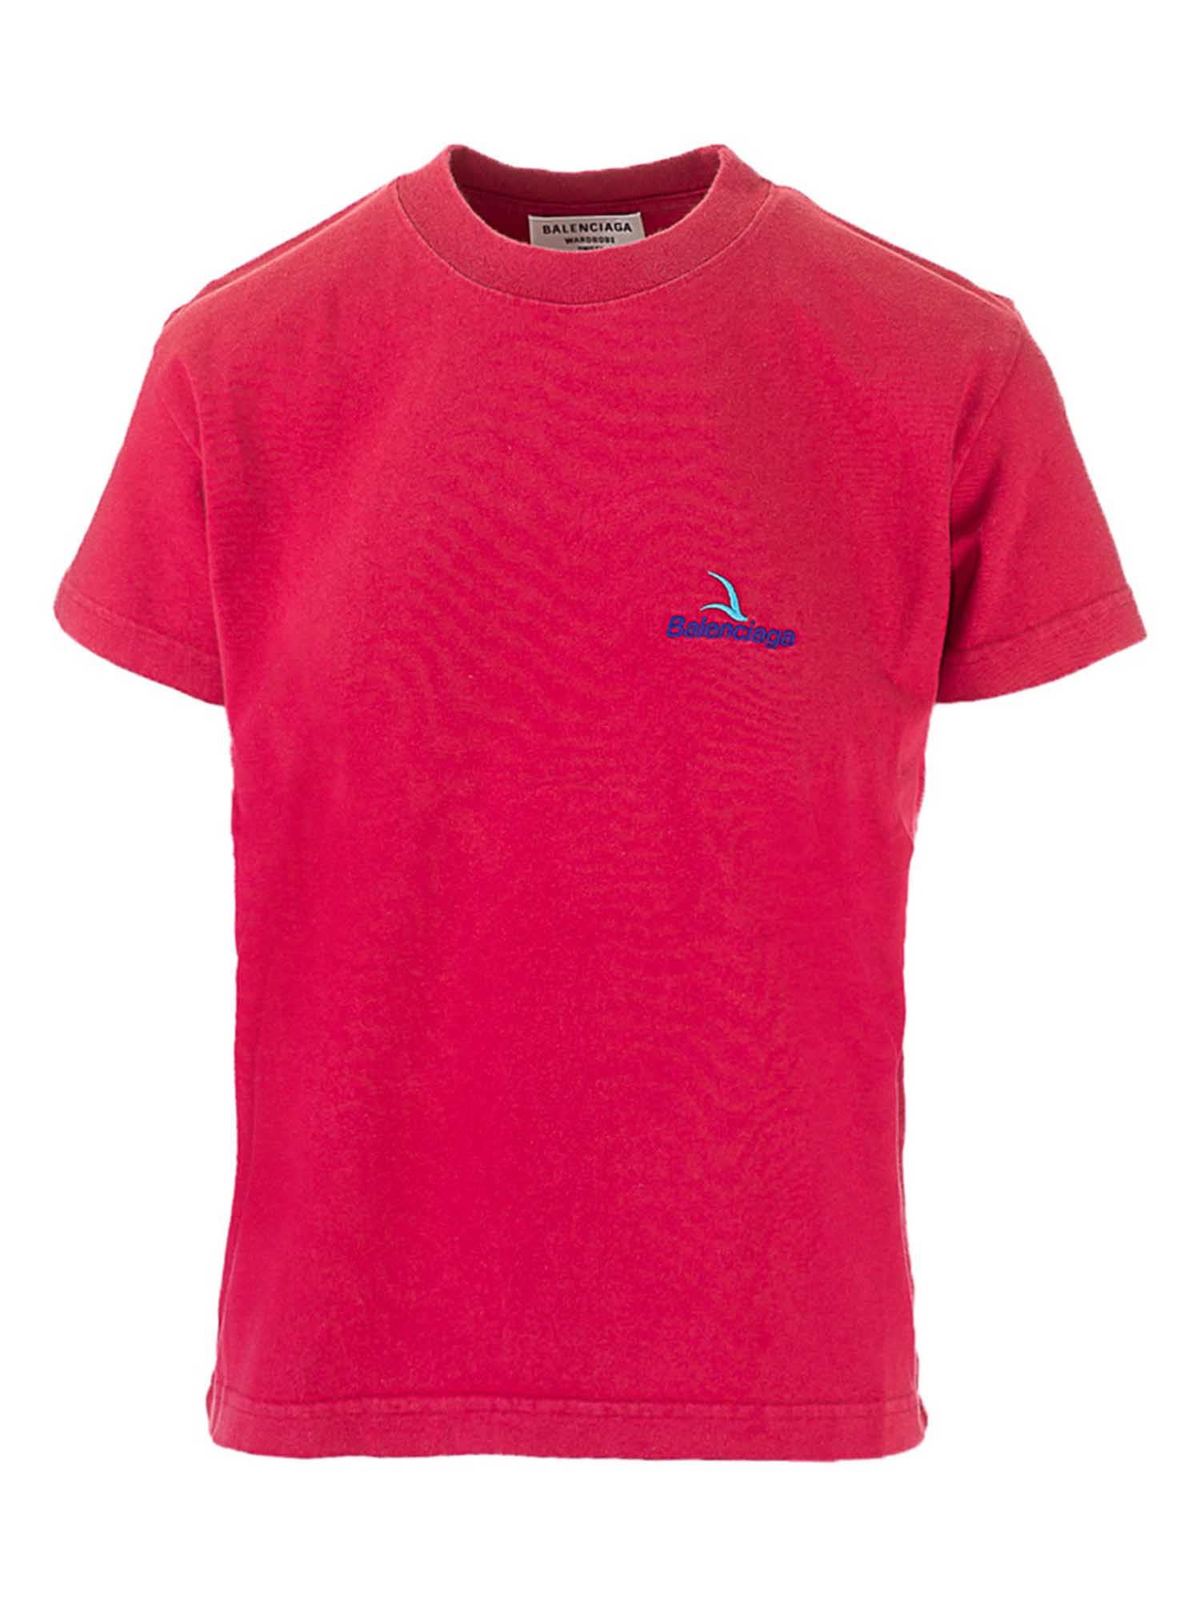 Balenciaga Clothing EMBROIDERED LOGO T-SHIRT IN RED